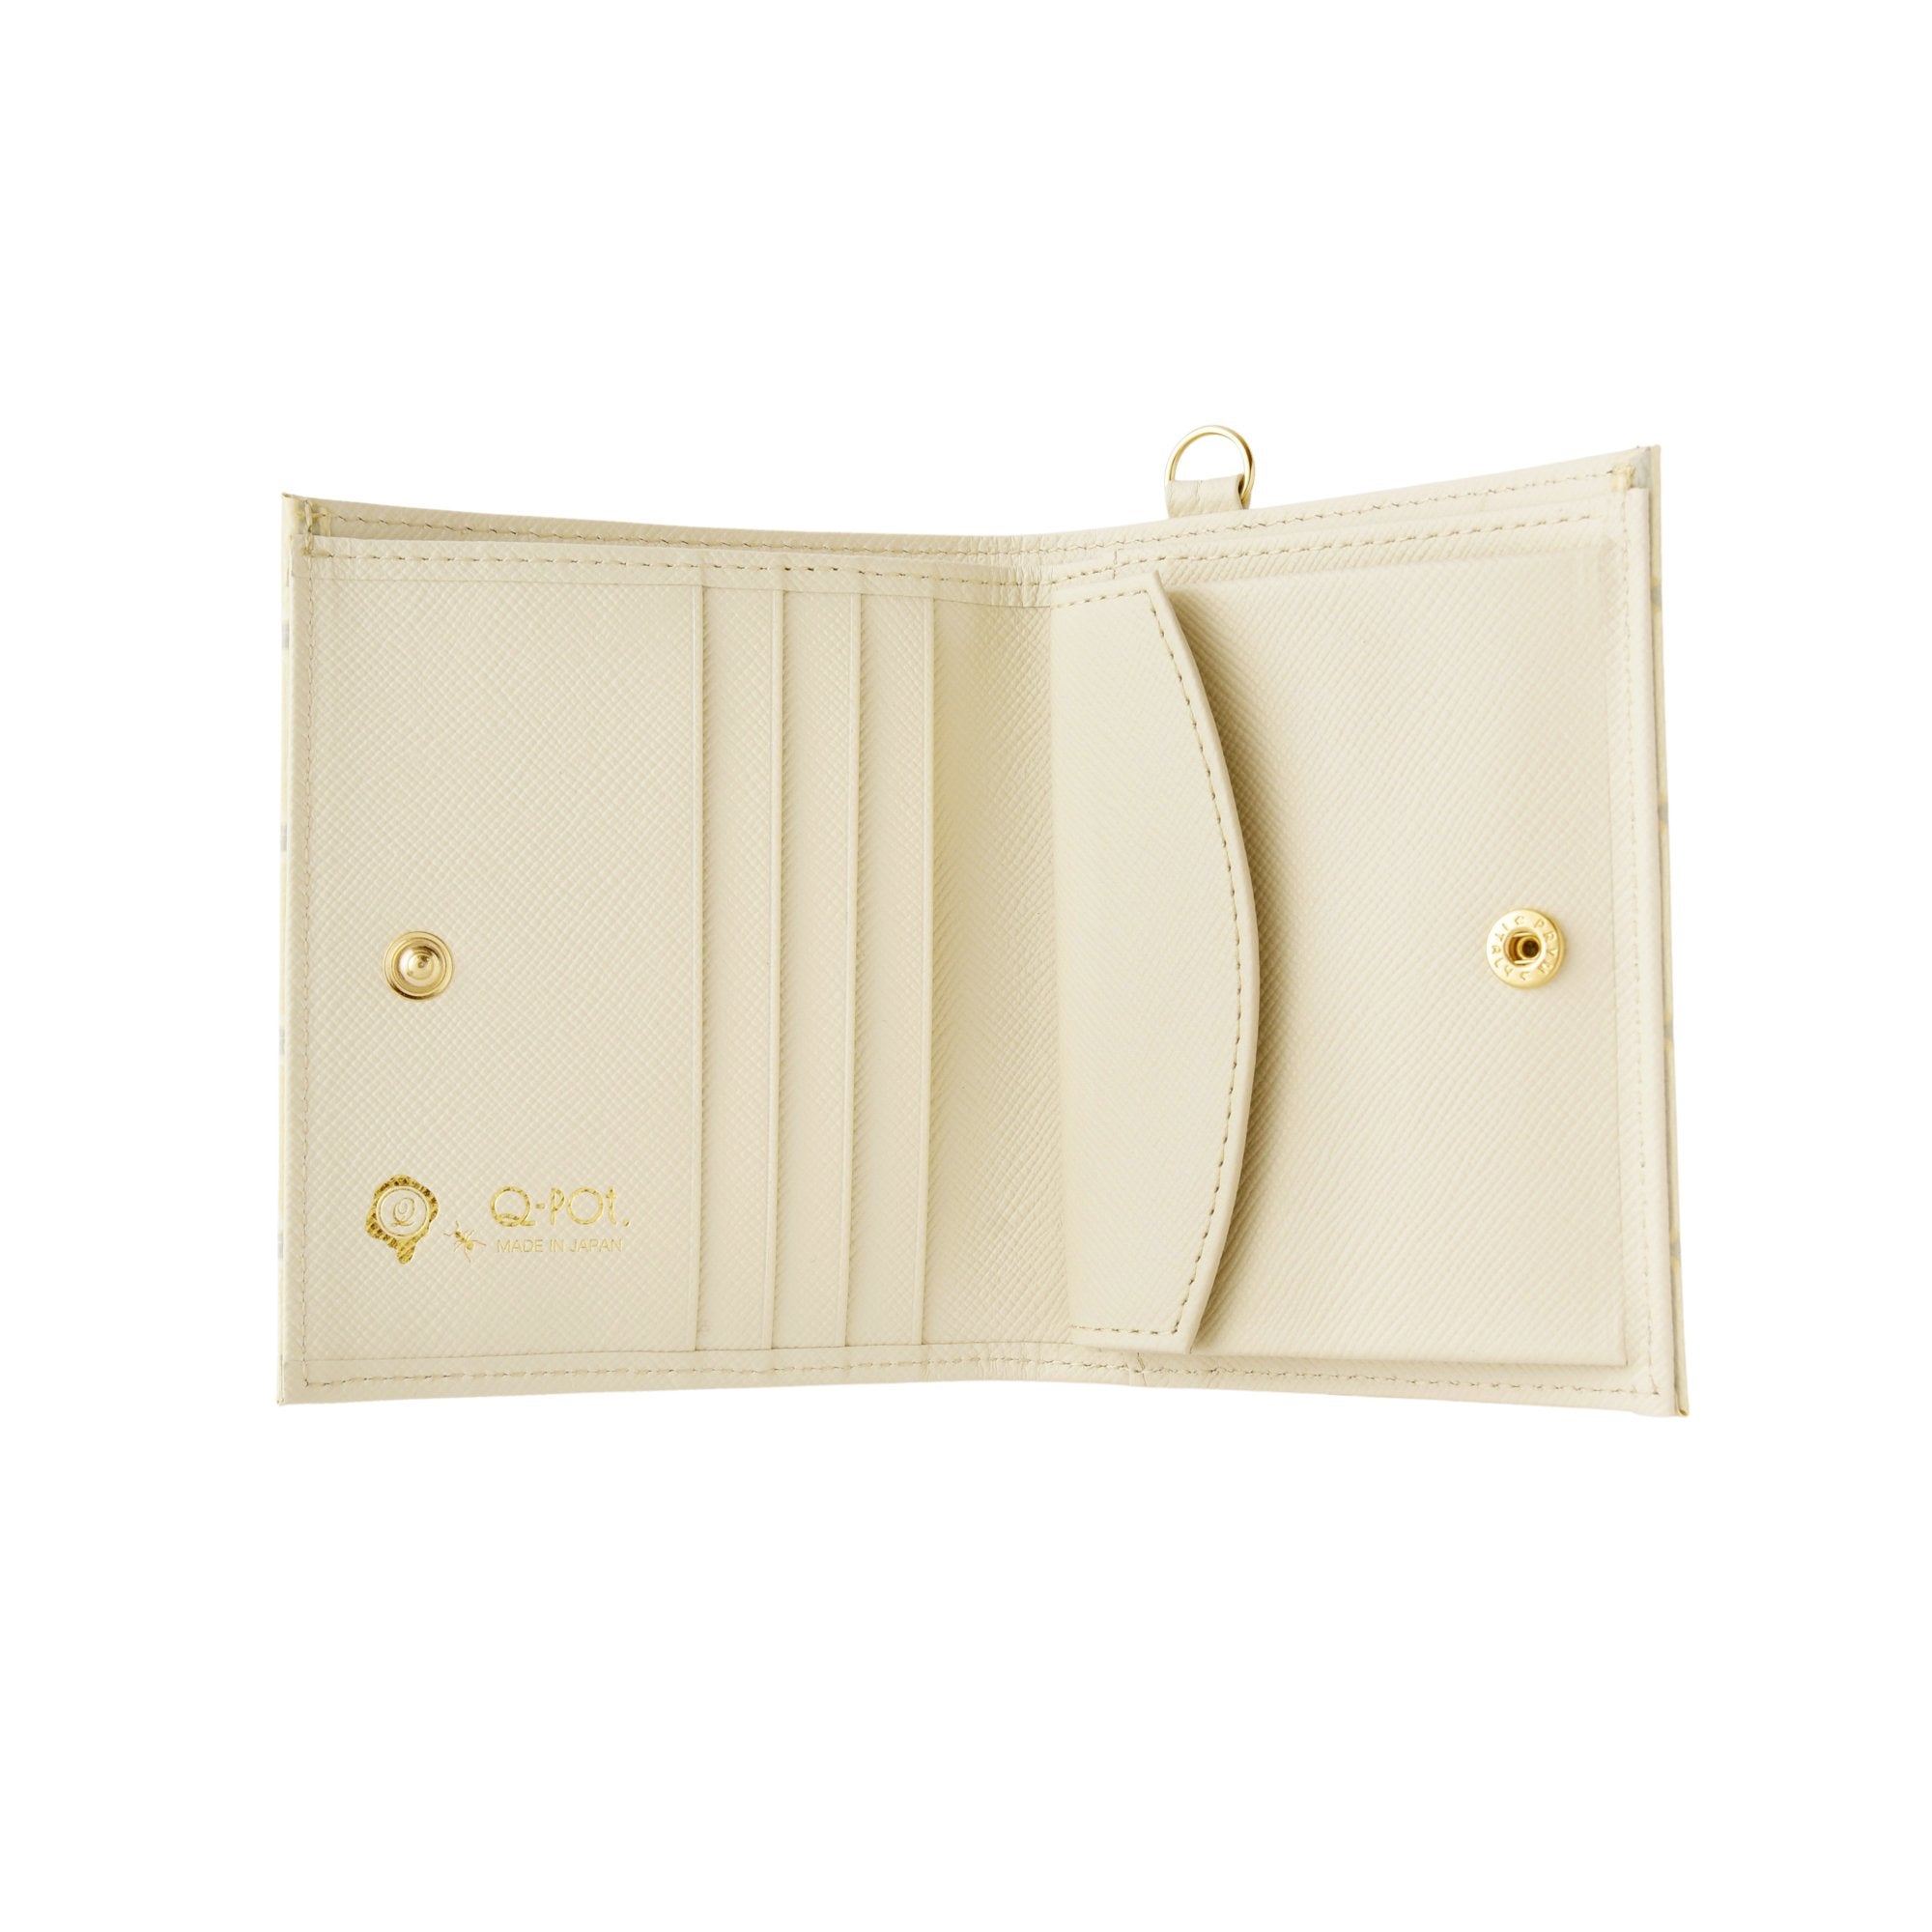 White Chocolate Leather Flap Short Wallet【Japan Jewelry】